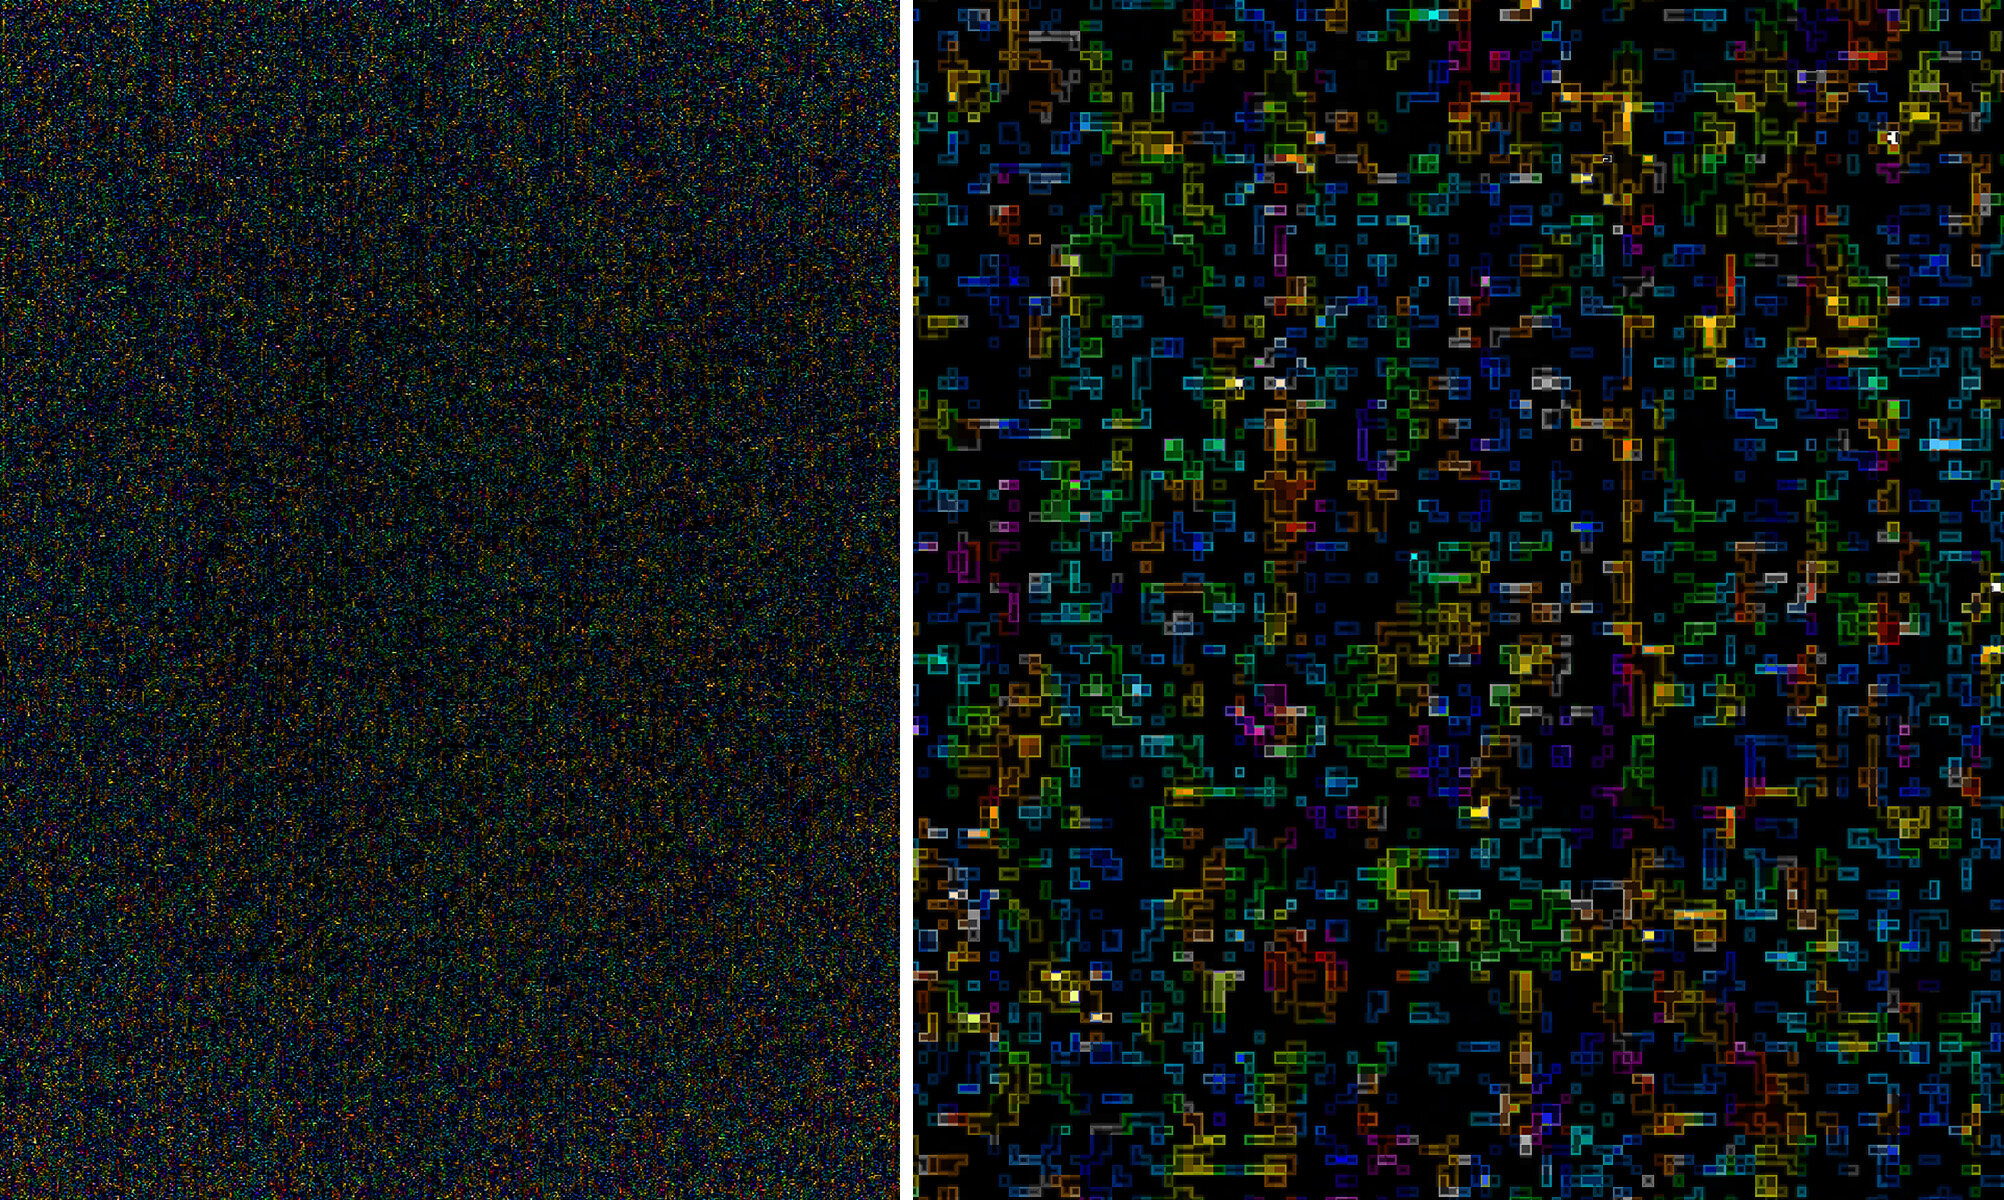 Pixelated Noise: Full image (left) and detail (right)